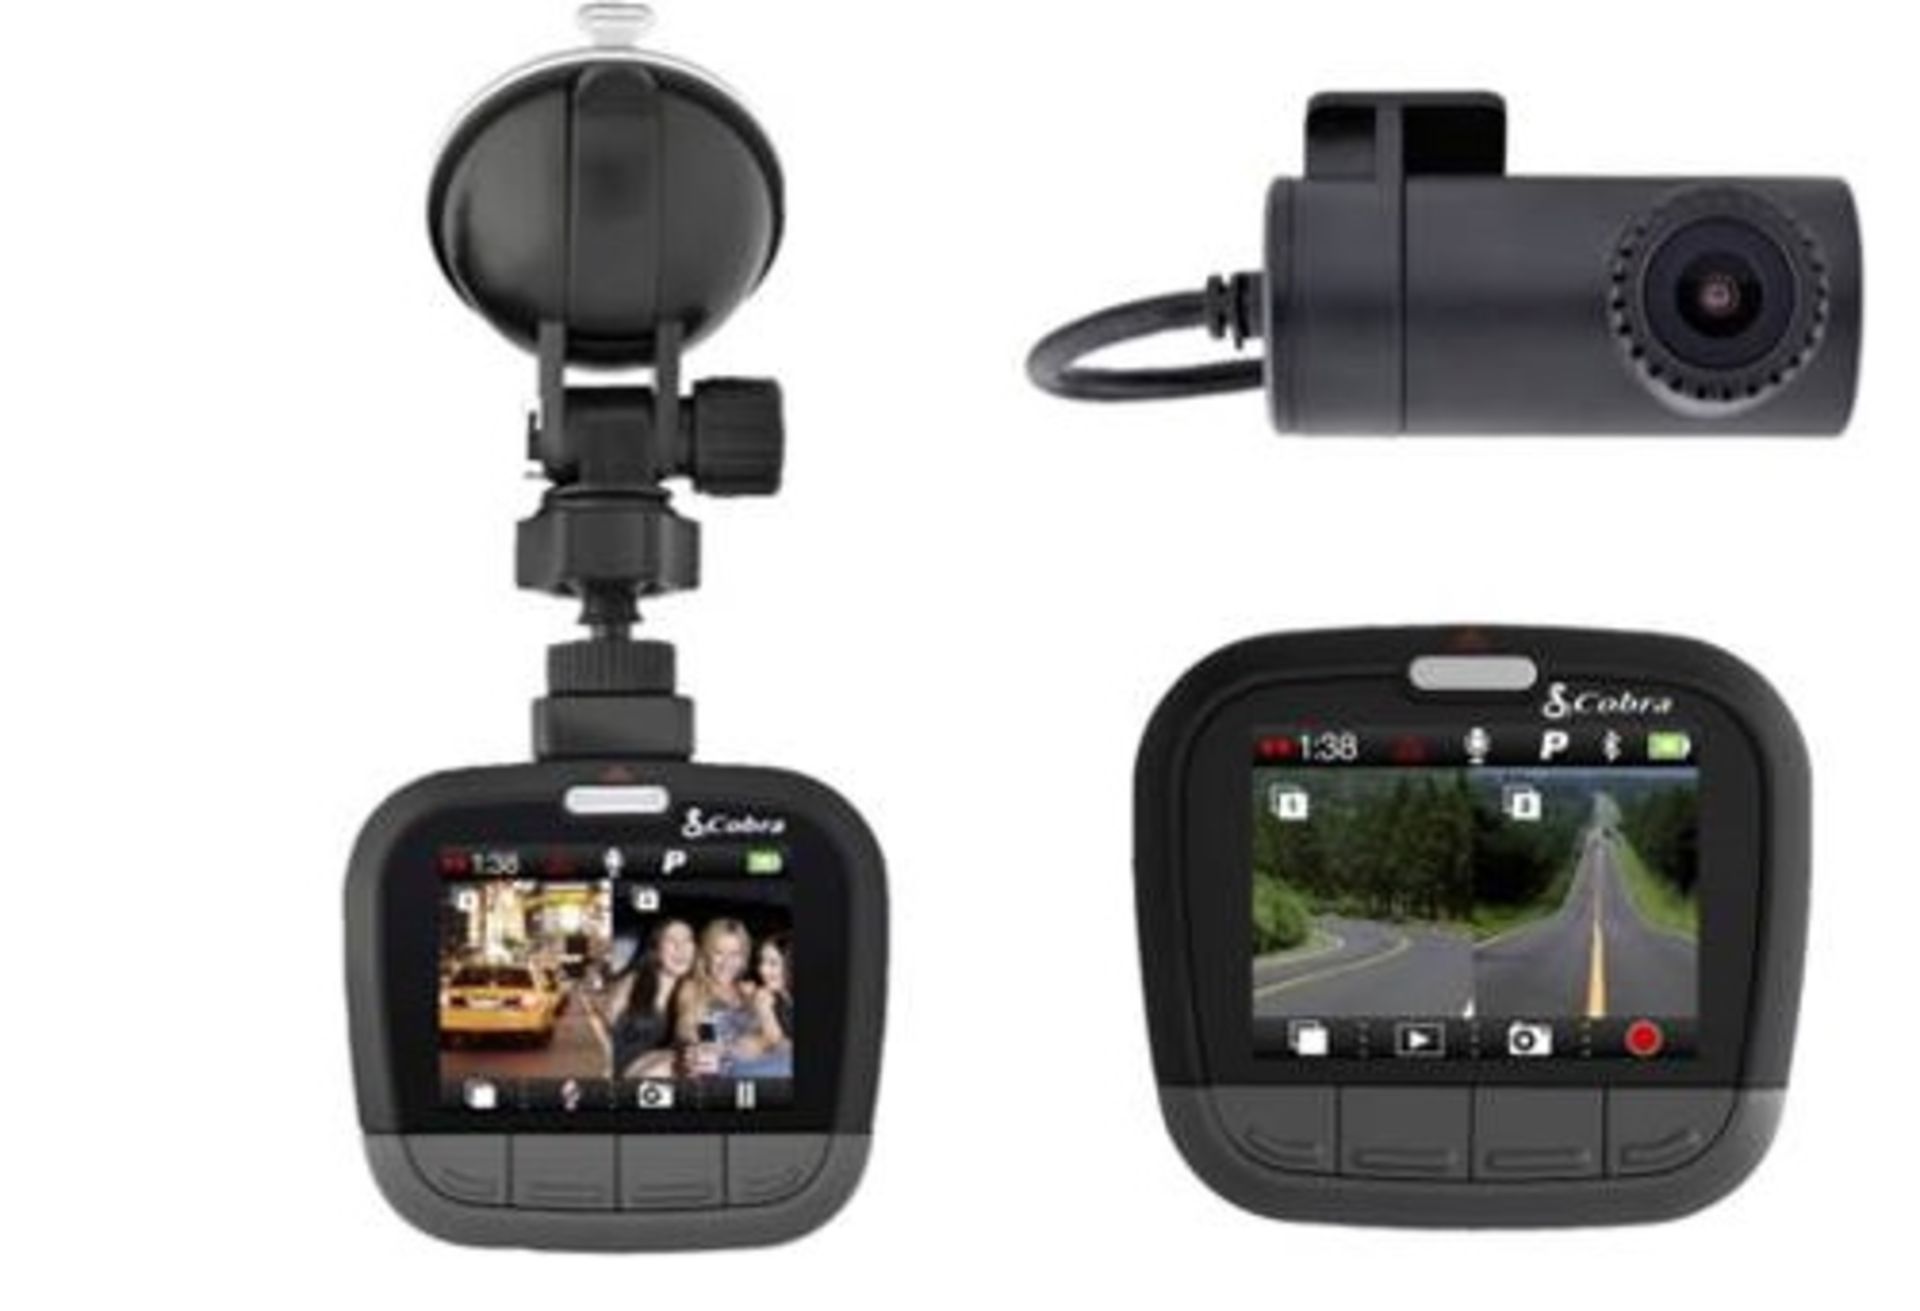 V Grade A Cobra CDR905DBT Dual View Dash Cam With 1080p Front and 720p Rear Camera With 16gb